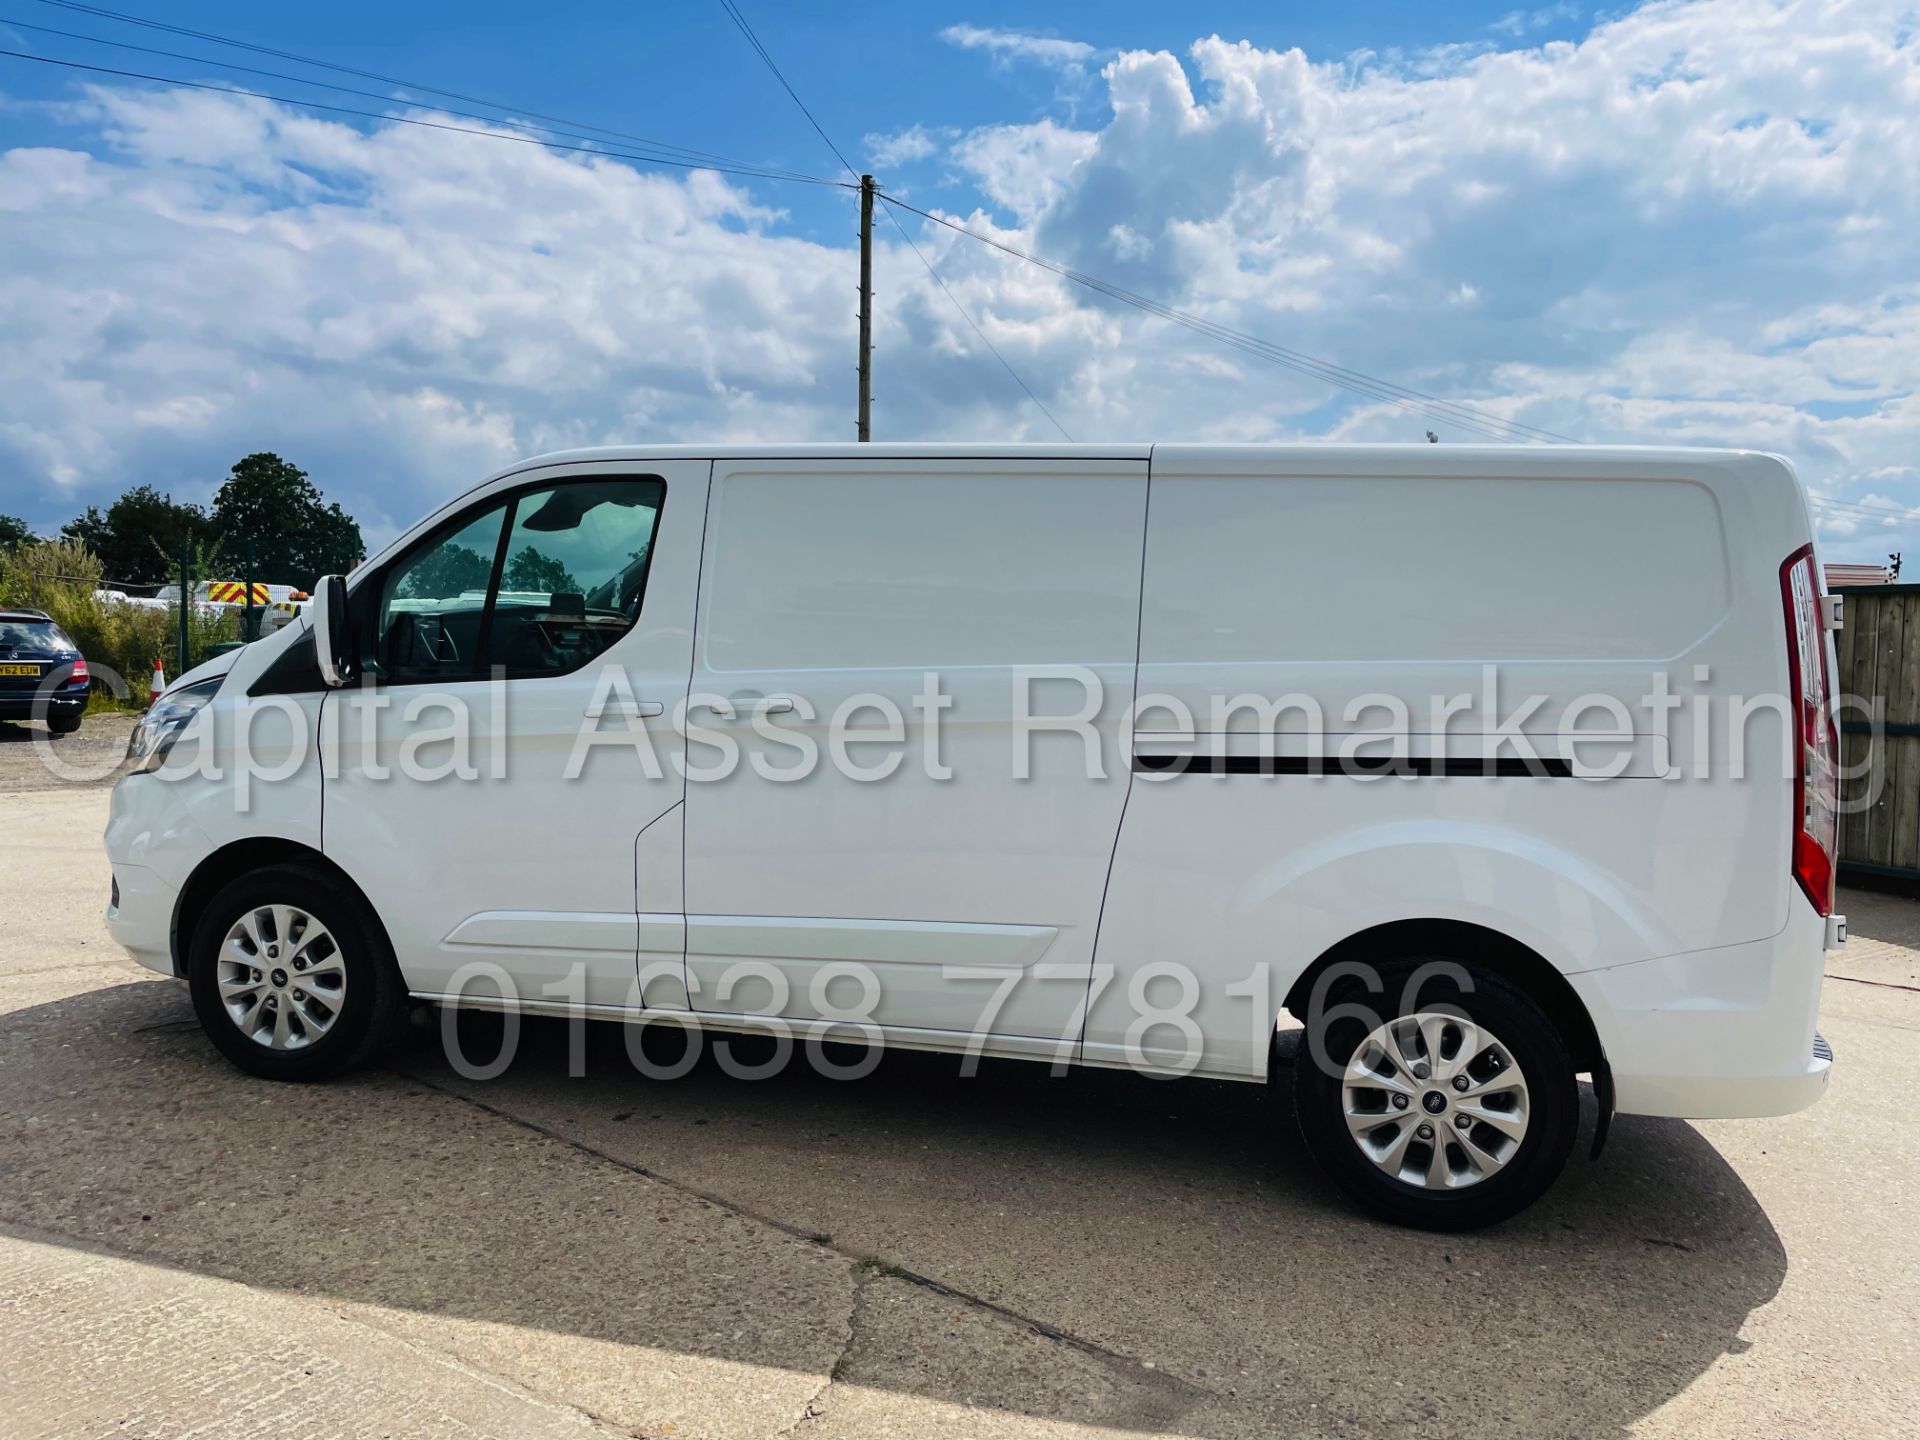 FORD TRANSIT CUSTOM *LIMITED EDITION* PANEL VAN (2018 - NEW MODEL) '2.0 TDCI - EURO 6 - 6 SPEED' - Image 4 of 46